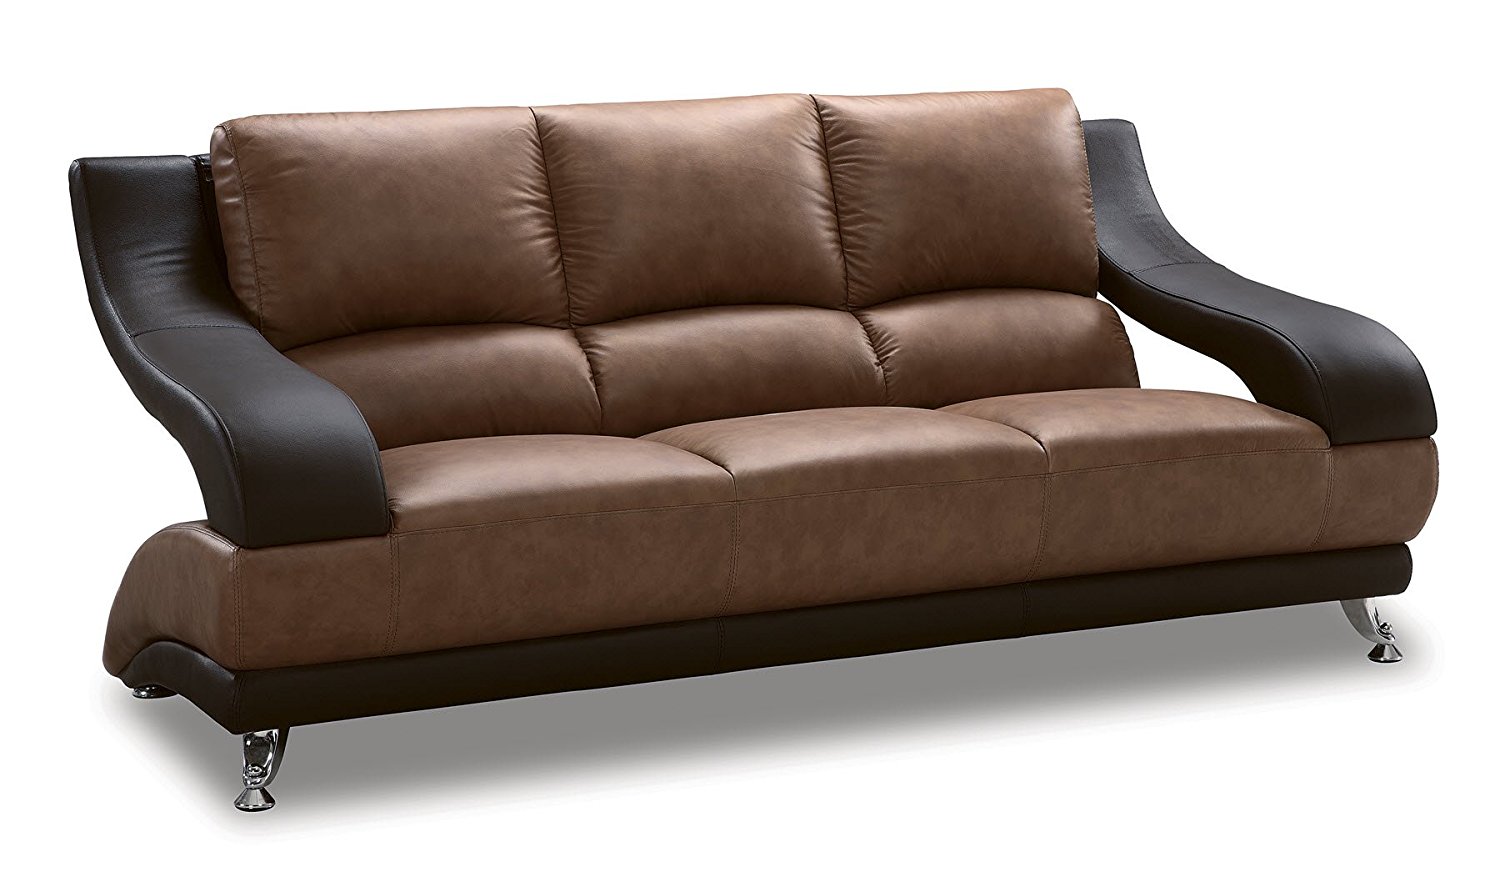 Global Furniture Wyatt Collection Leather Matching Sofa - Decor Ideas